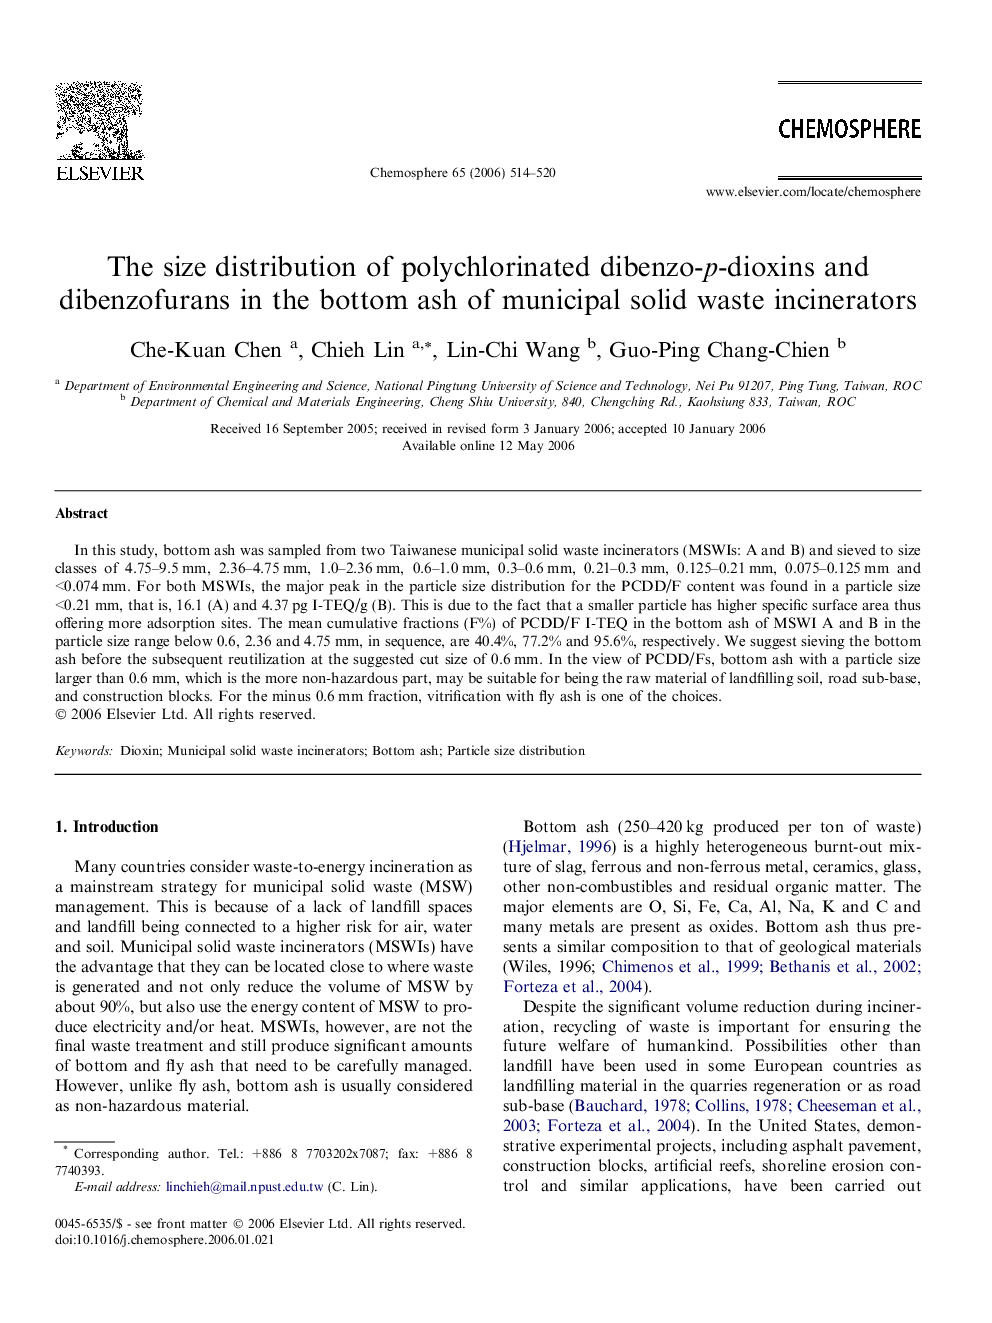 The size distribution of polychlorinated dibenzo-p-dioxins and dibenzofurans in the bottom ash of municipal solid waste incinerators